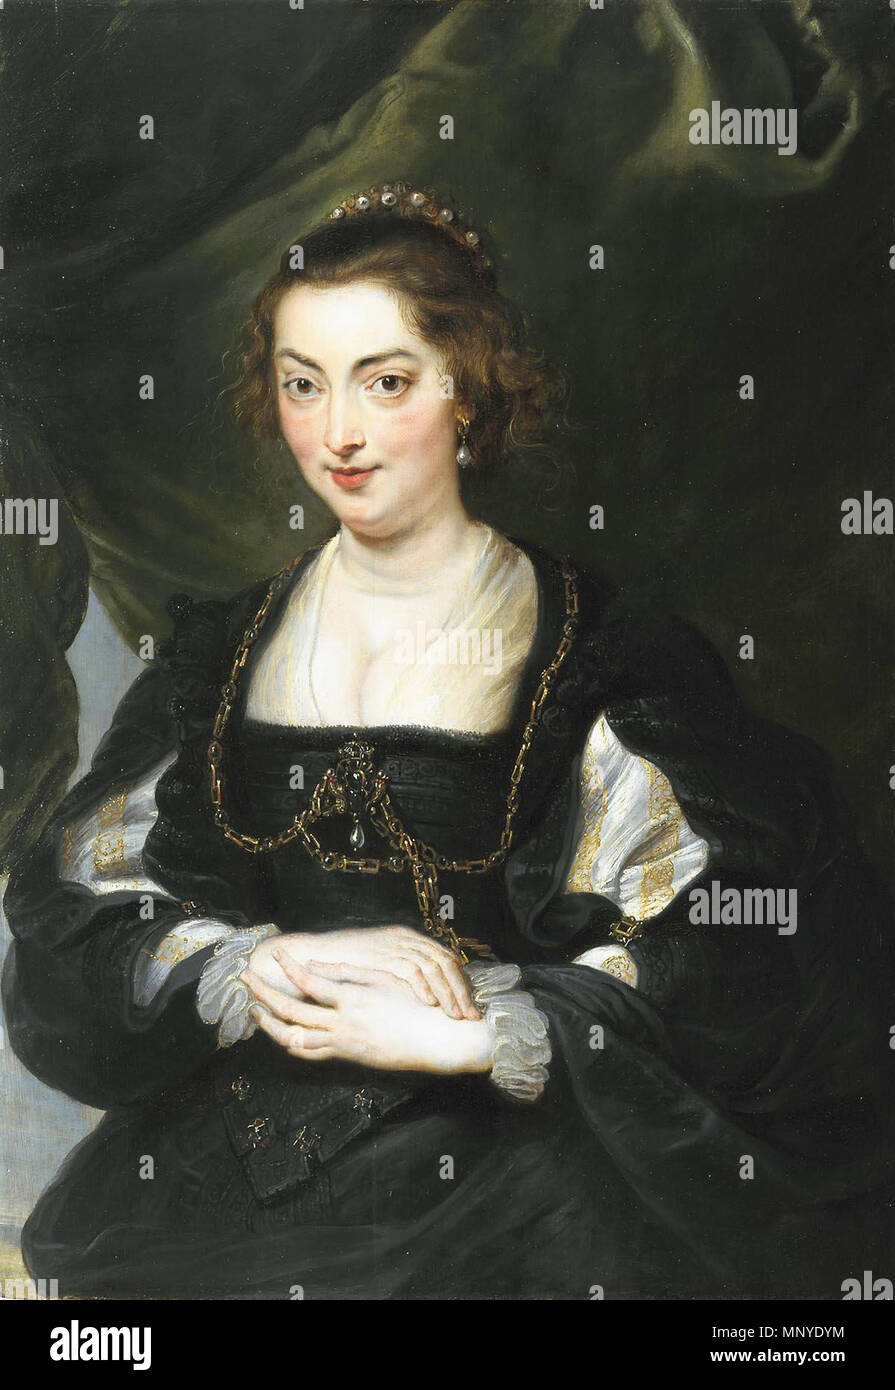 Portrait of a young woman. Alternative title(s): Portrait of Isabella Brandt [old title]  circa 1620-1630.   1273 Workshop of Peter Paul Rubens 003 Stock Photo